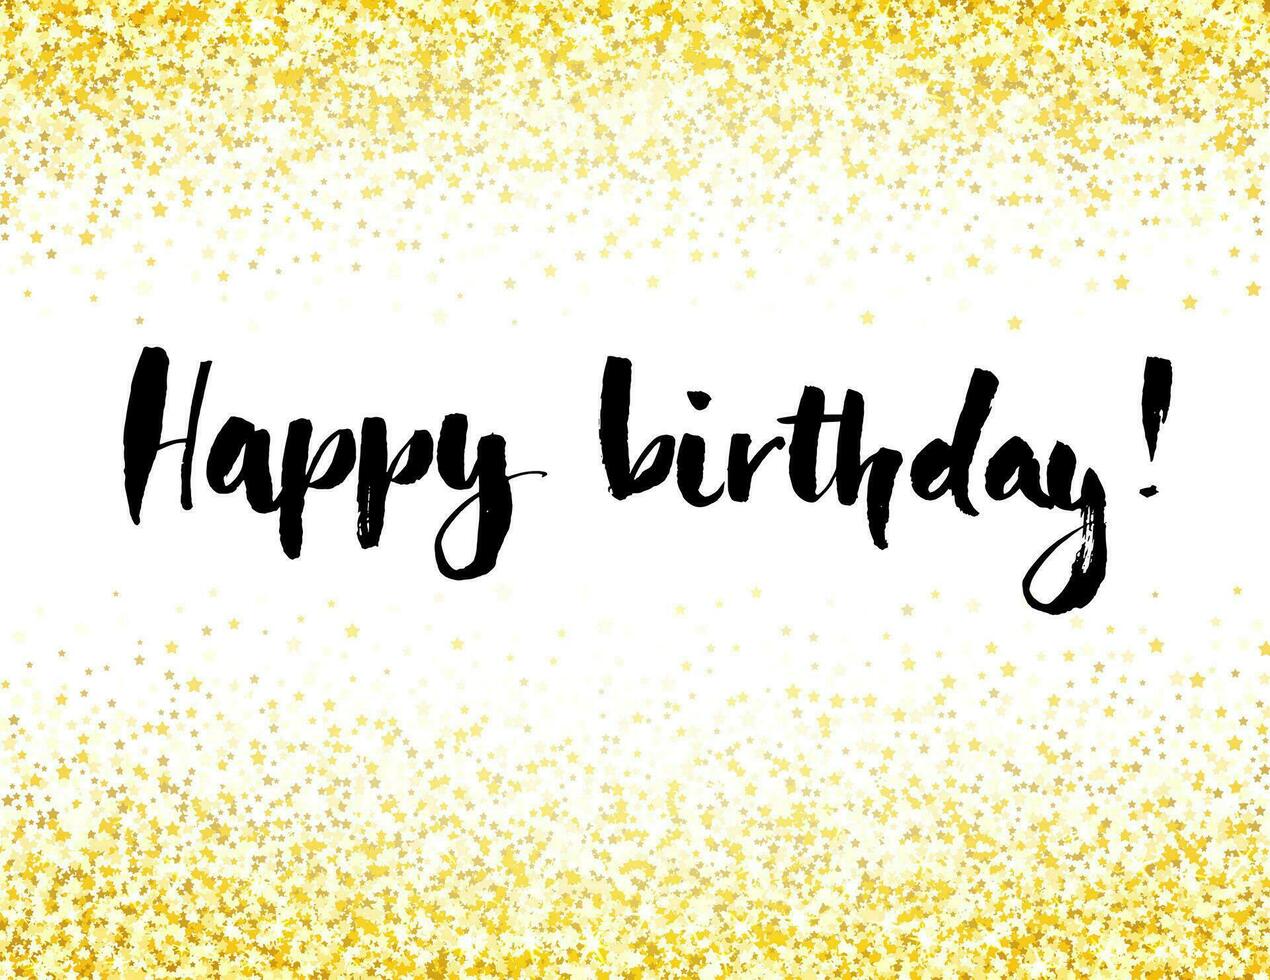 happy birthday card with gold glitter background vector